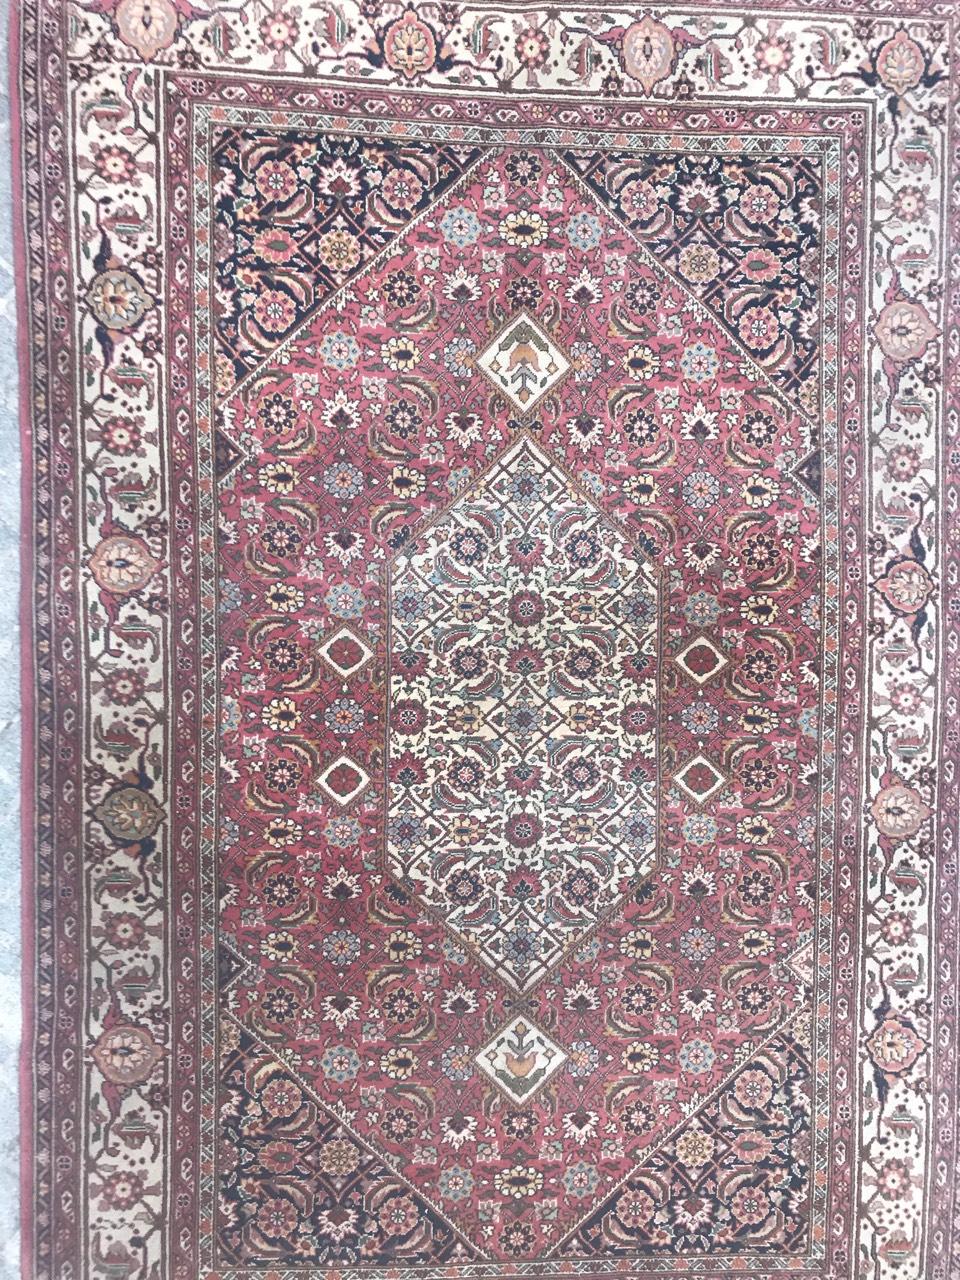 Discover elegance with this exquisite 20th-century rug featuring a captivating Tabriz style design on a lovely pink field, adorned with shades of blue and green. Hand-knotted with precision, the wool velvet on a cotton foundation ensures both